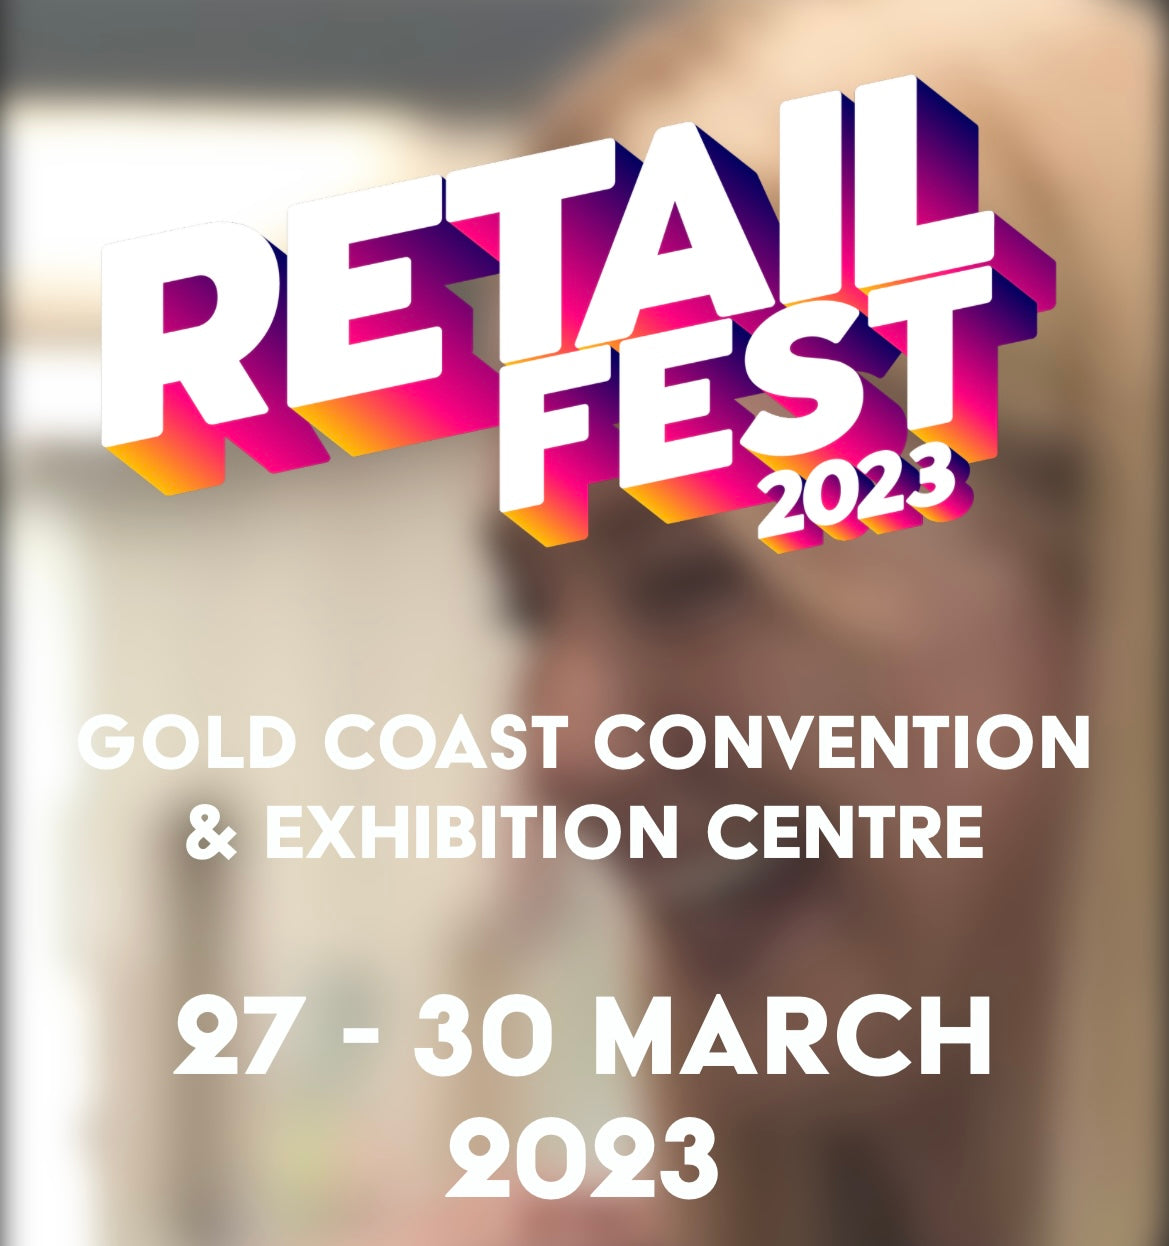 Oh Flossy is heading to Retail Fest - March 28-30